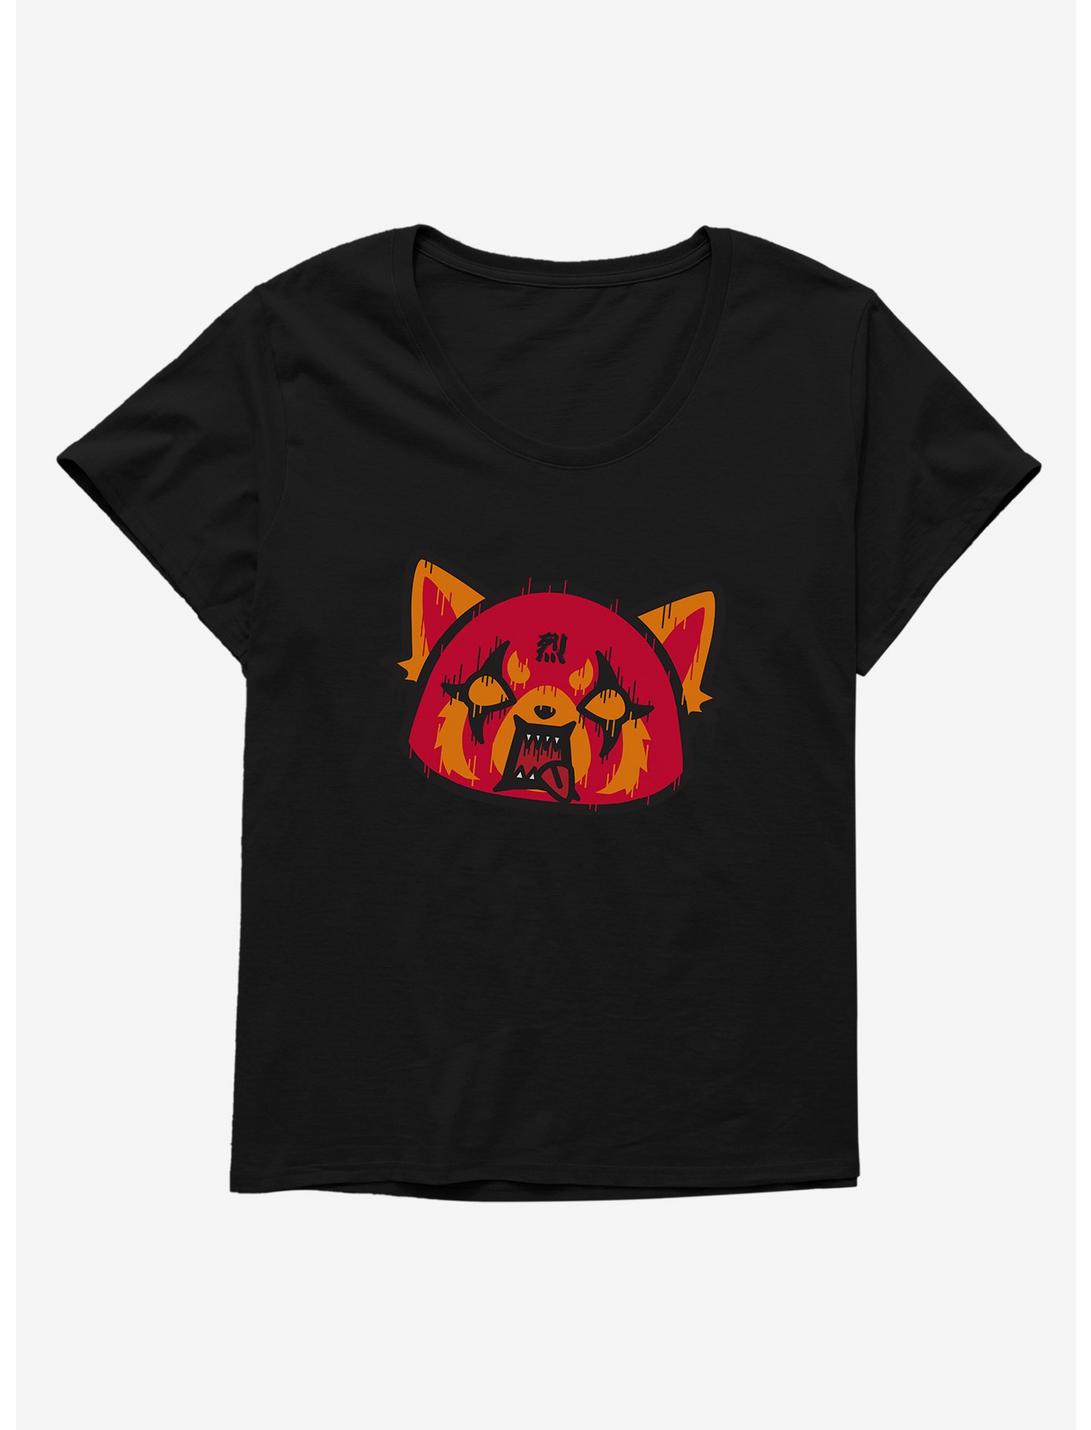 Aggretsuko Metal Rock Out To The Max Girls T-Shirt Plus Size, , hi-res